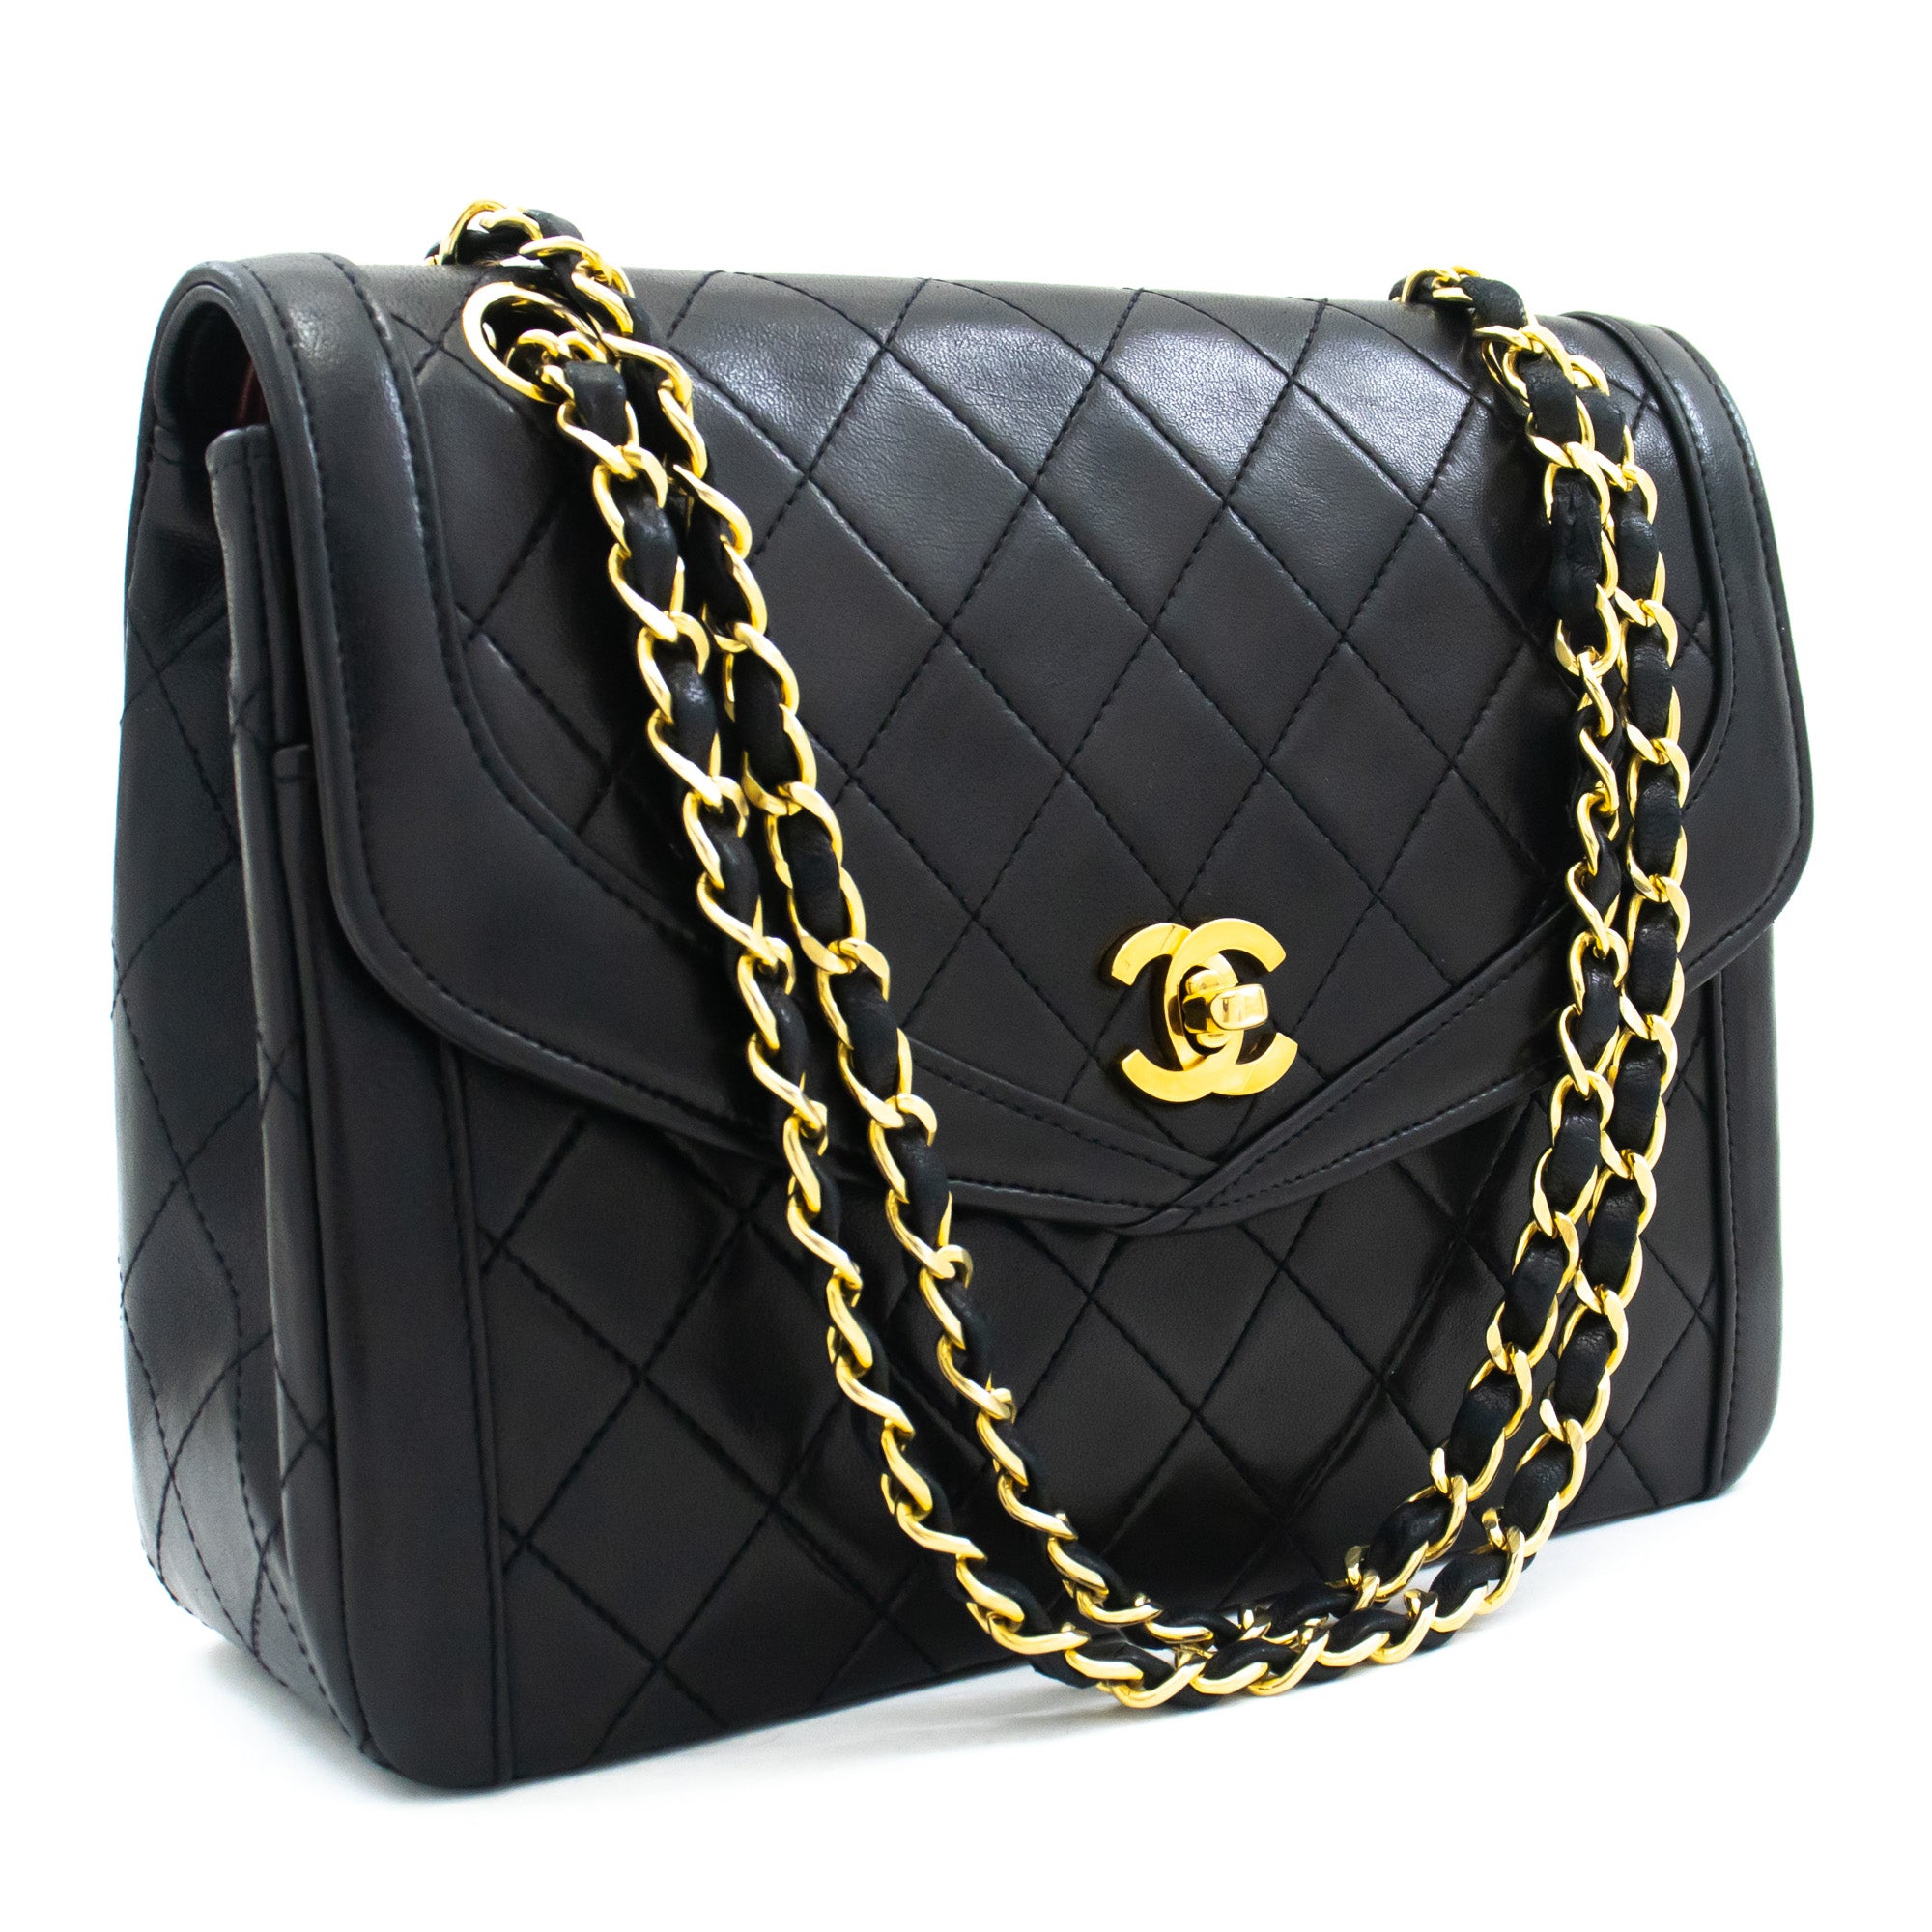 CHANEL, Bags, Chanel Mini Square Flap Bag In Dark Beige Quilted Lambskin